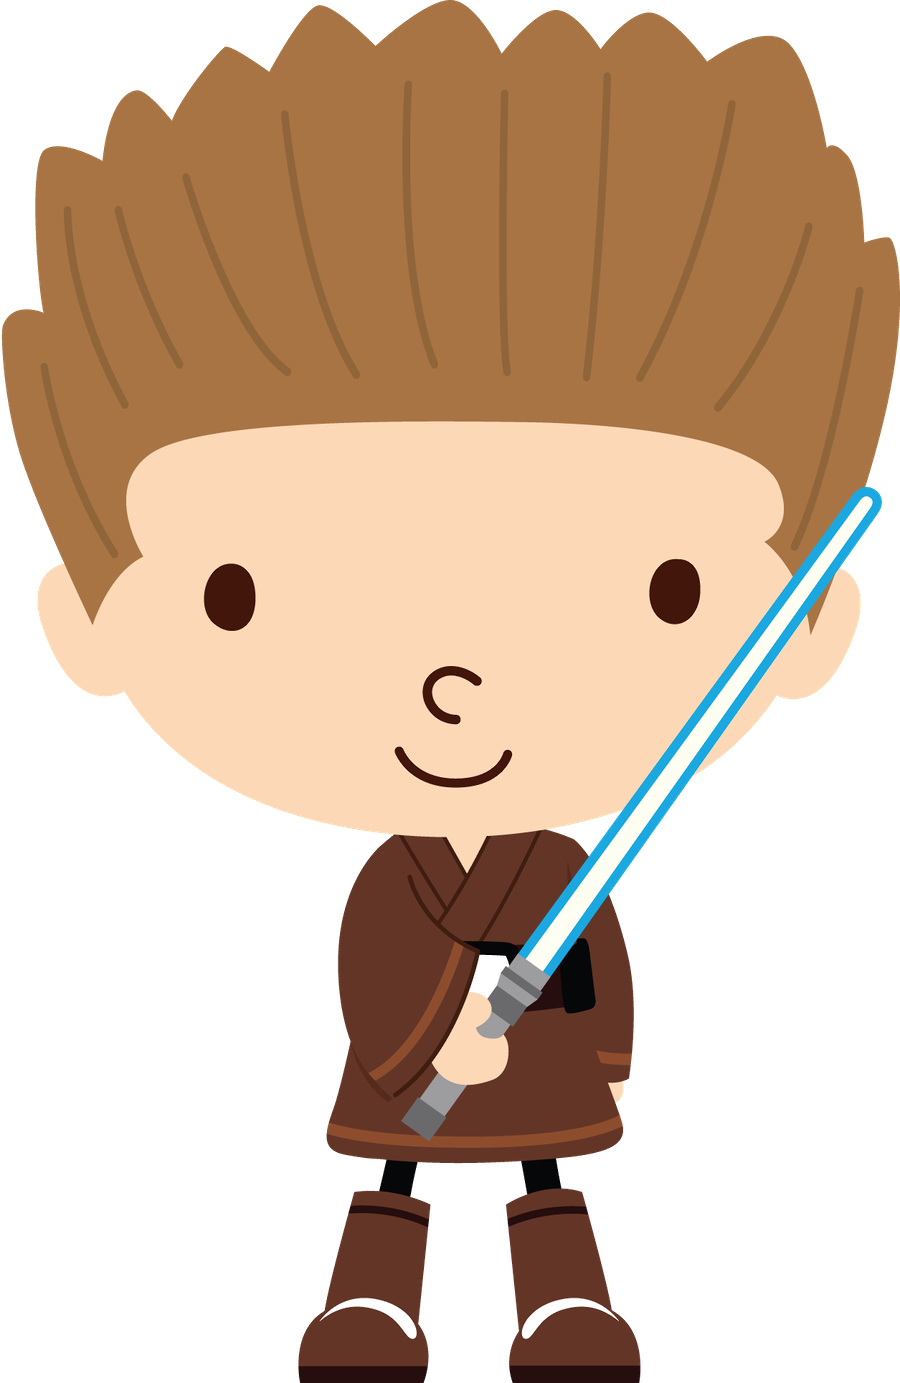 starwars clipart may the fourth be with you